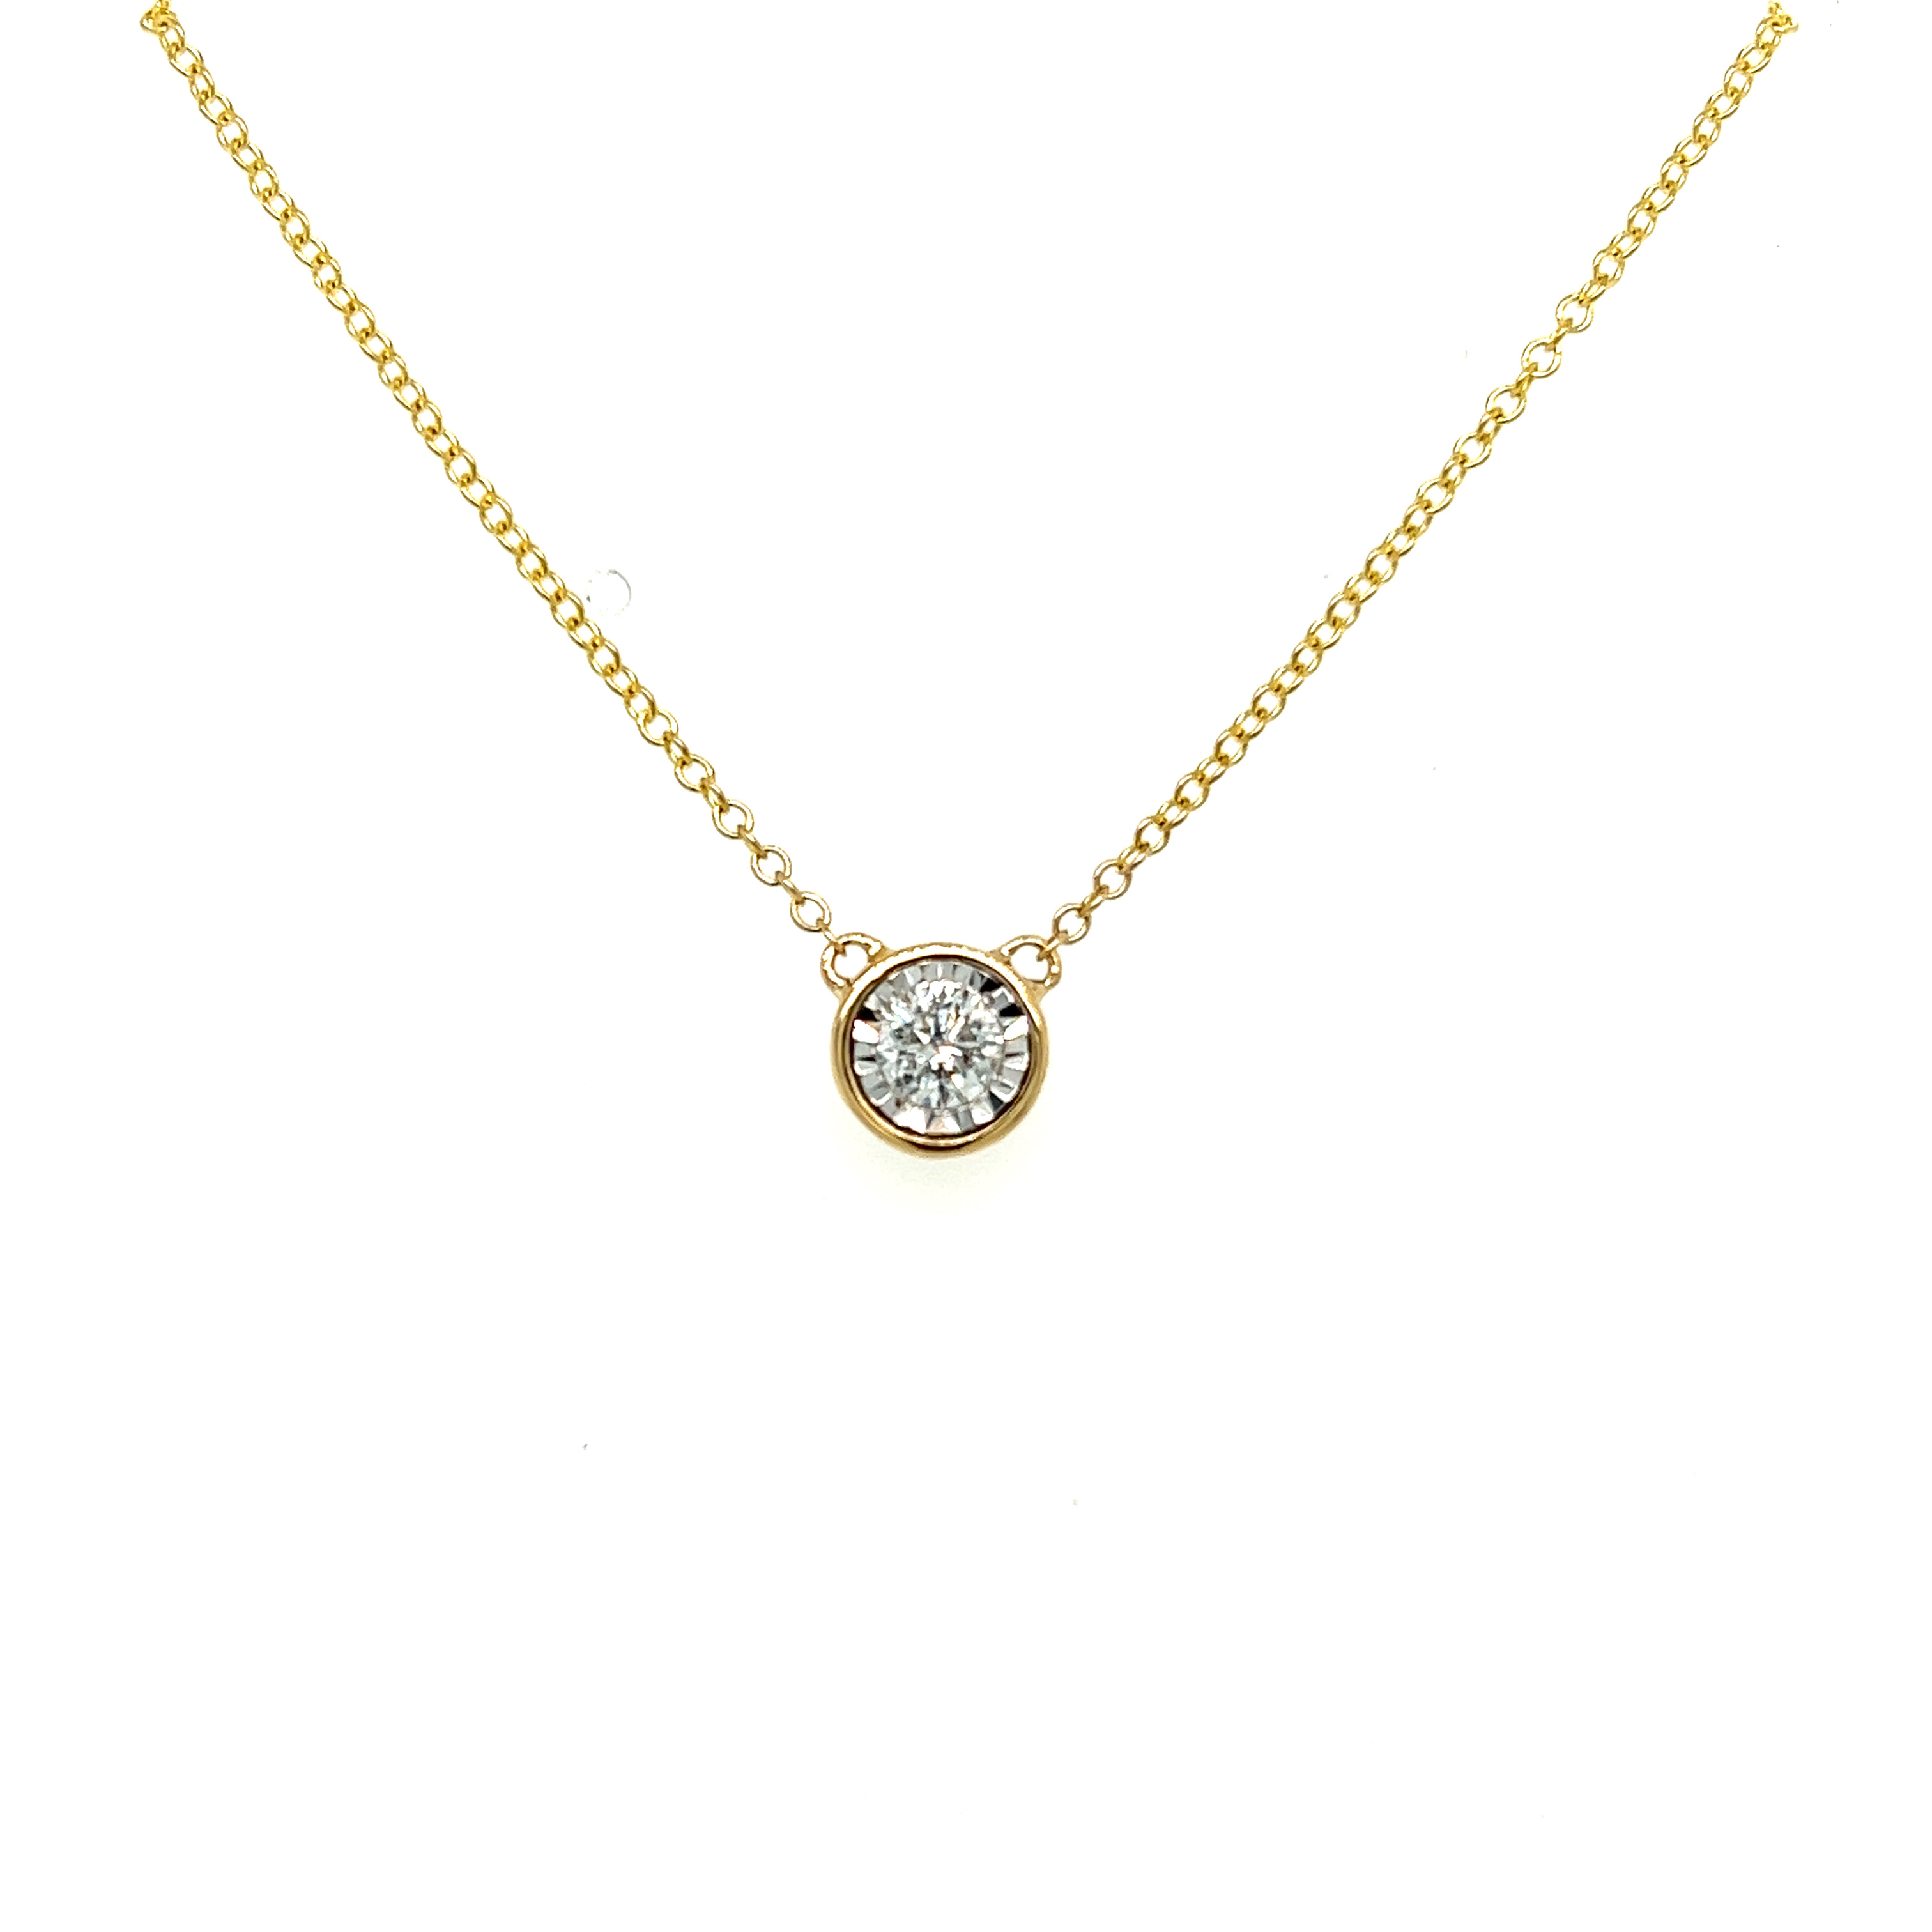 14 Karat Yellow Gold Solitaire Necklace Length 16 With One 0.30ct Round Brilliant G I Diamond